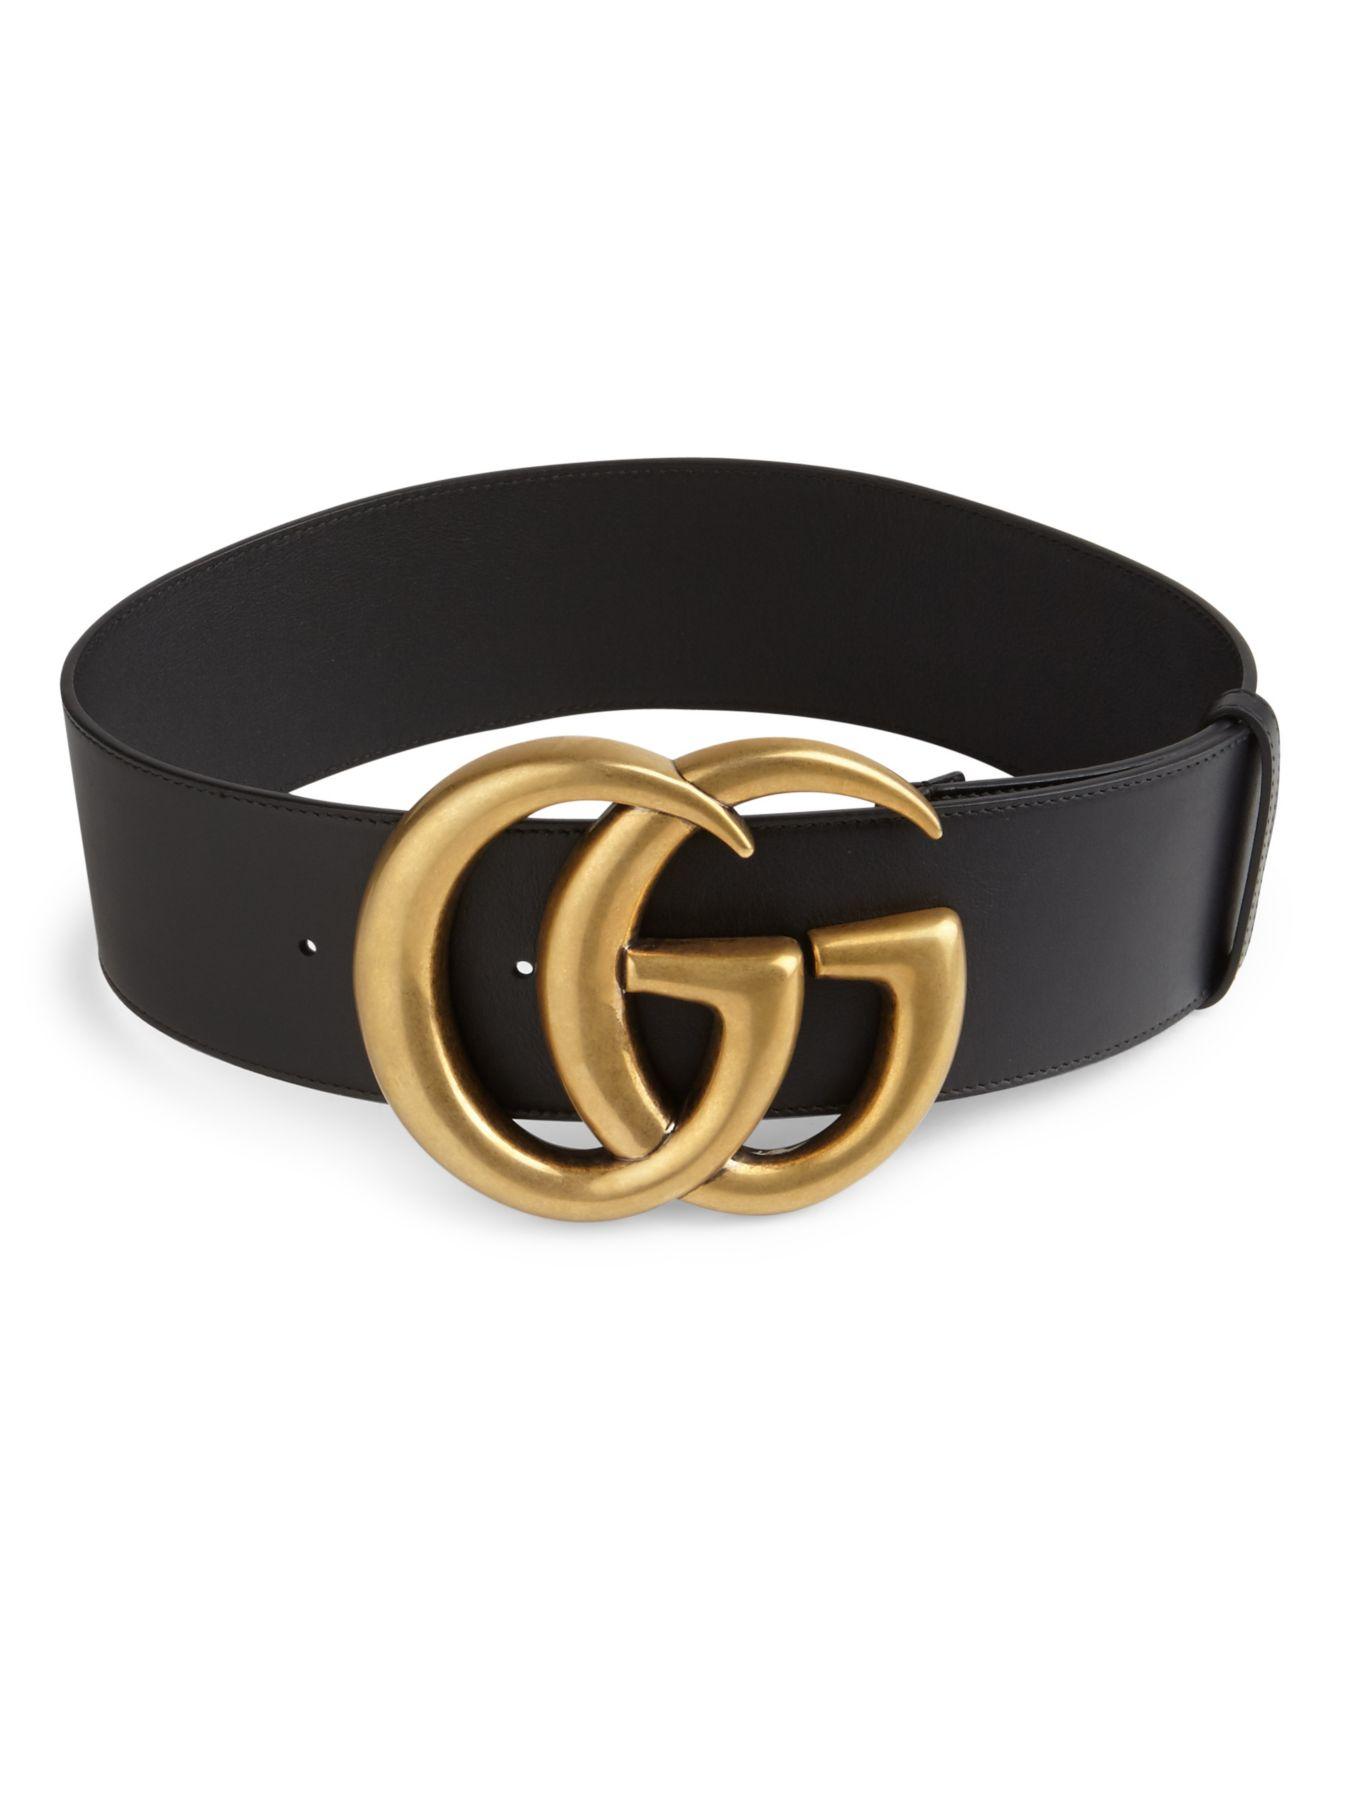 Gucci GG Buckle Leather Belt in Black - Lyst